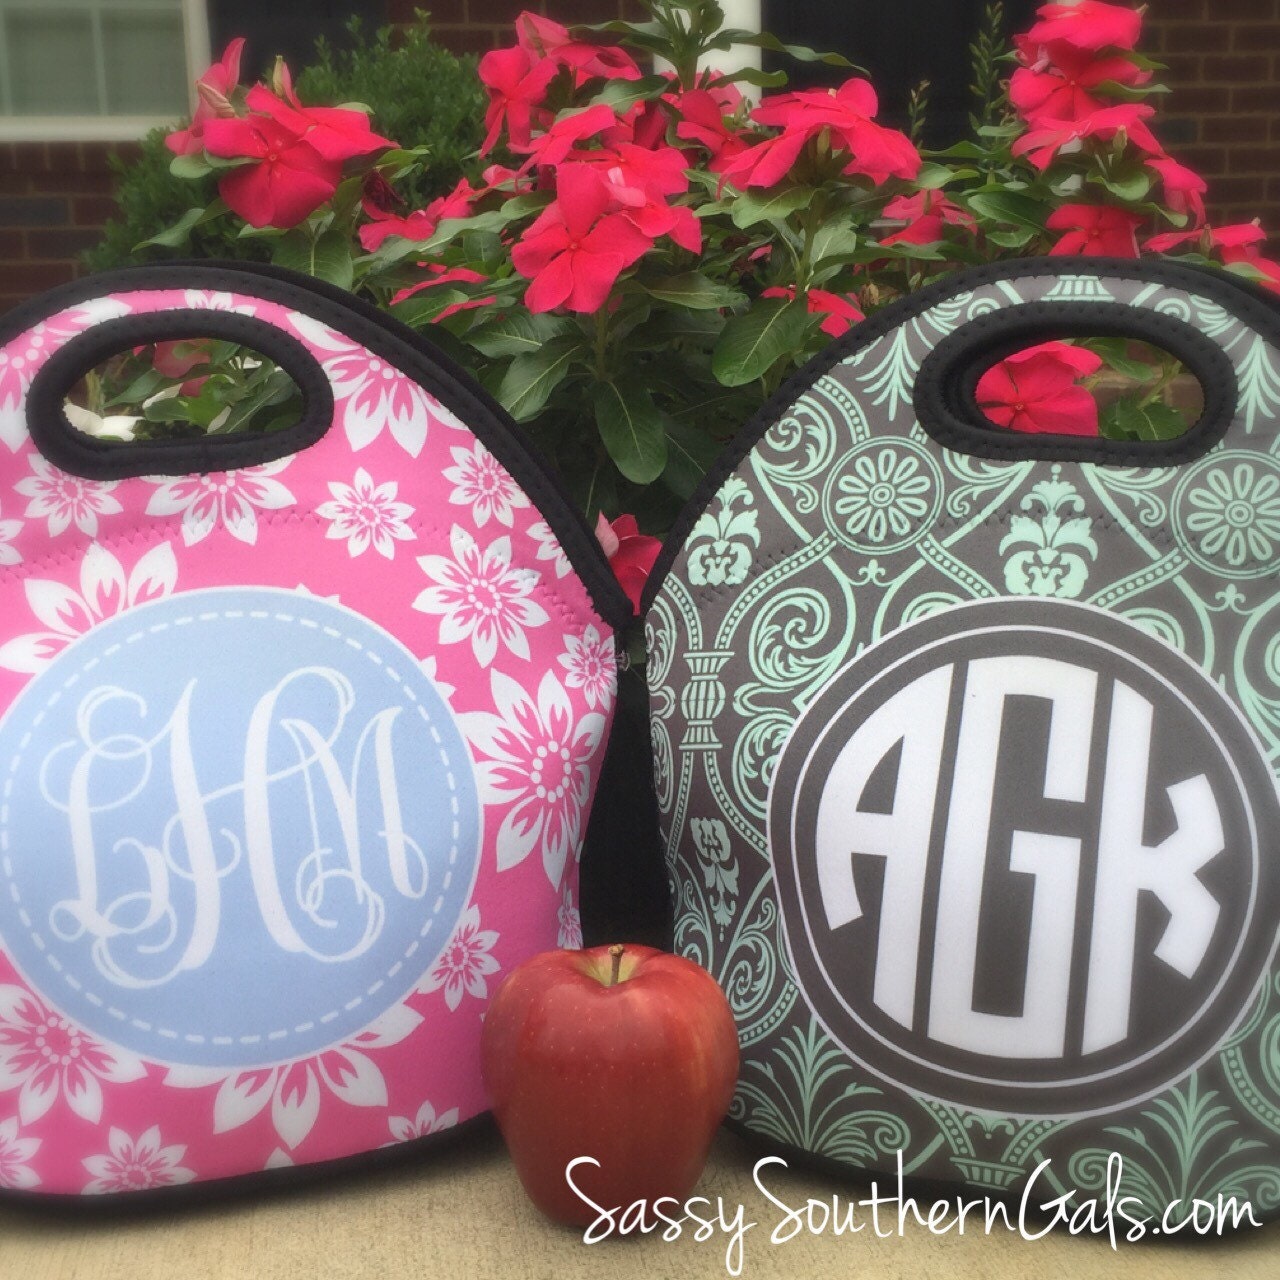 Lunch Bag for Women Monogrammed Lunch Bags by SassySouthernGals